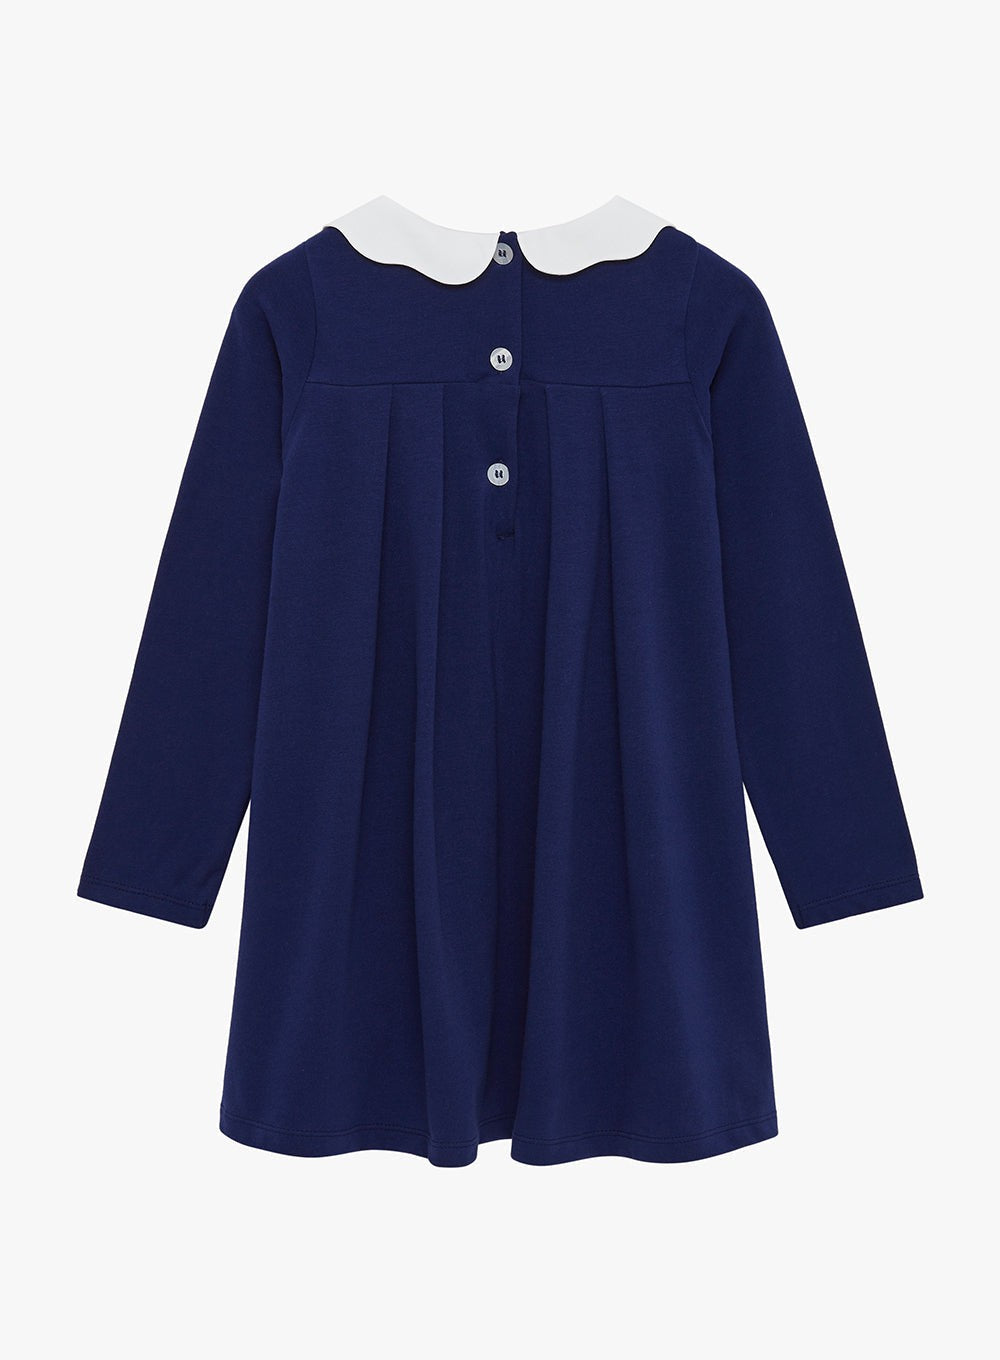 Girls Anna Jersey Dress in Navy | Trotters London – Trotters ...